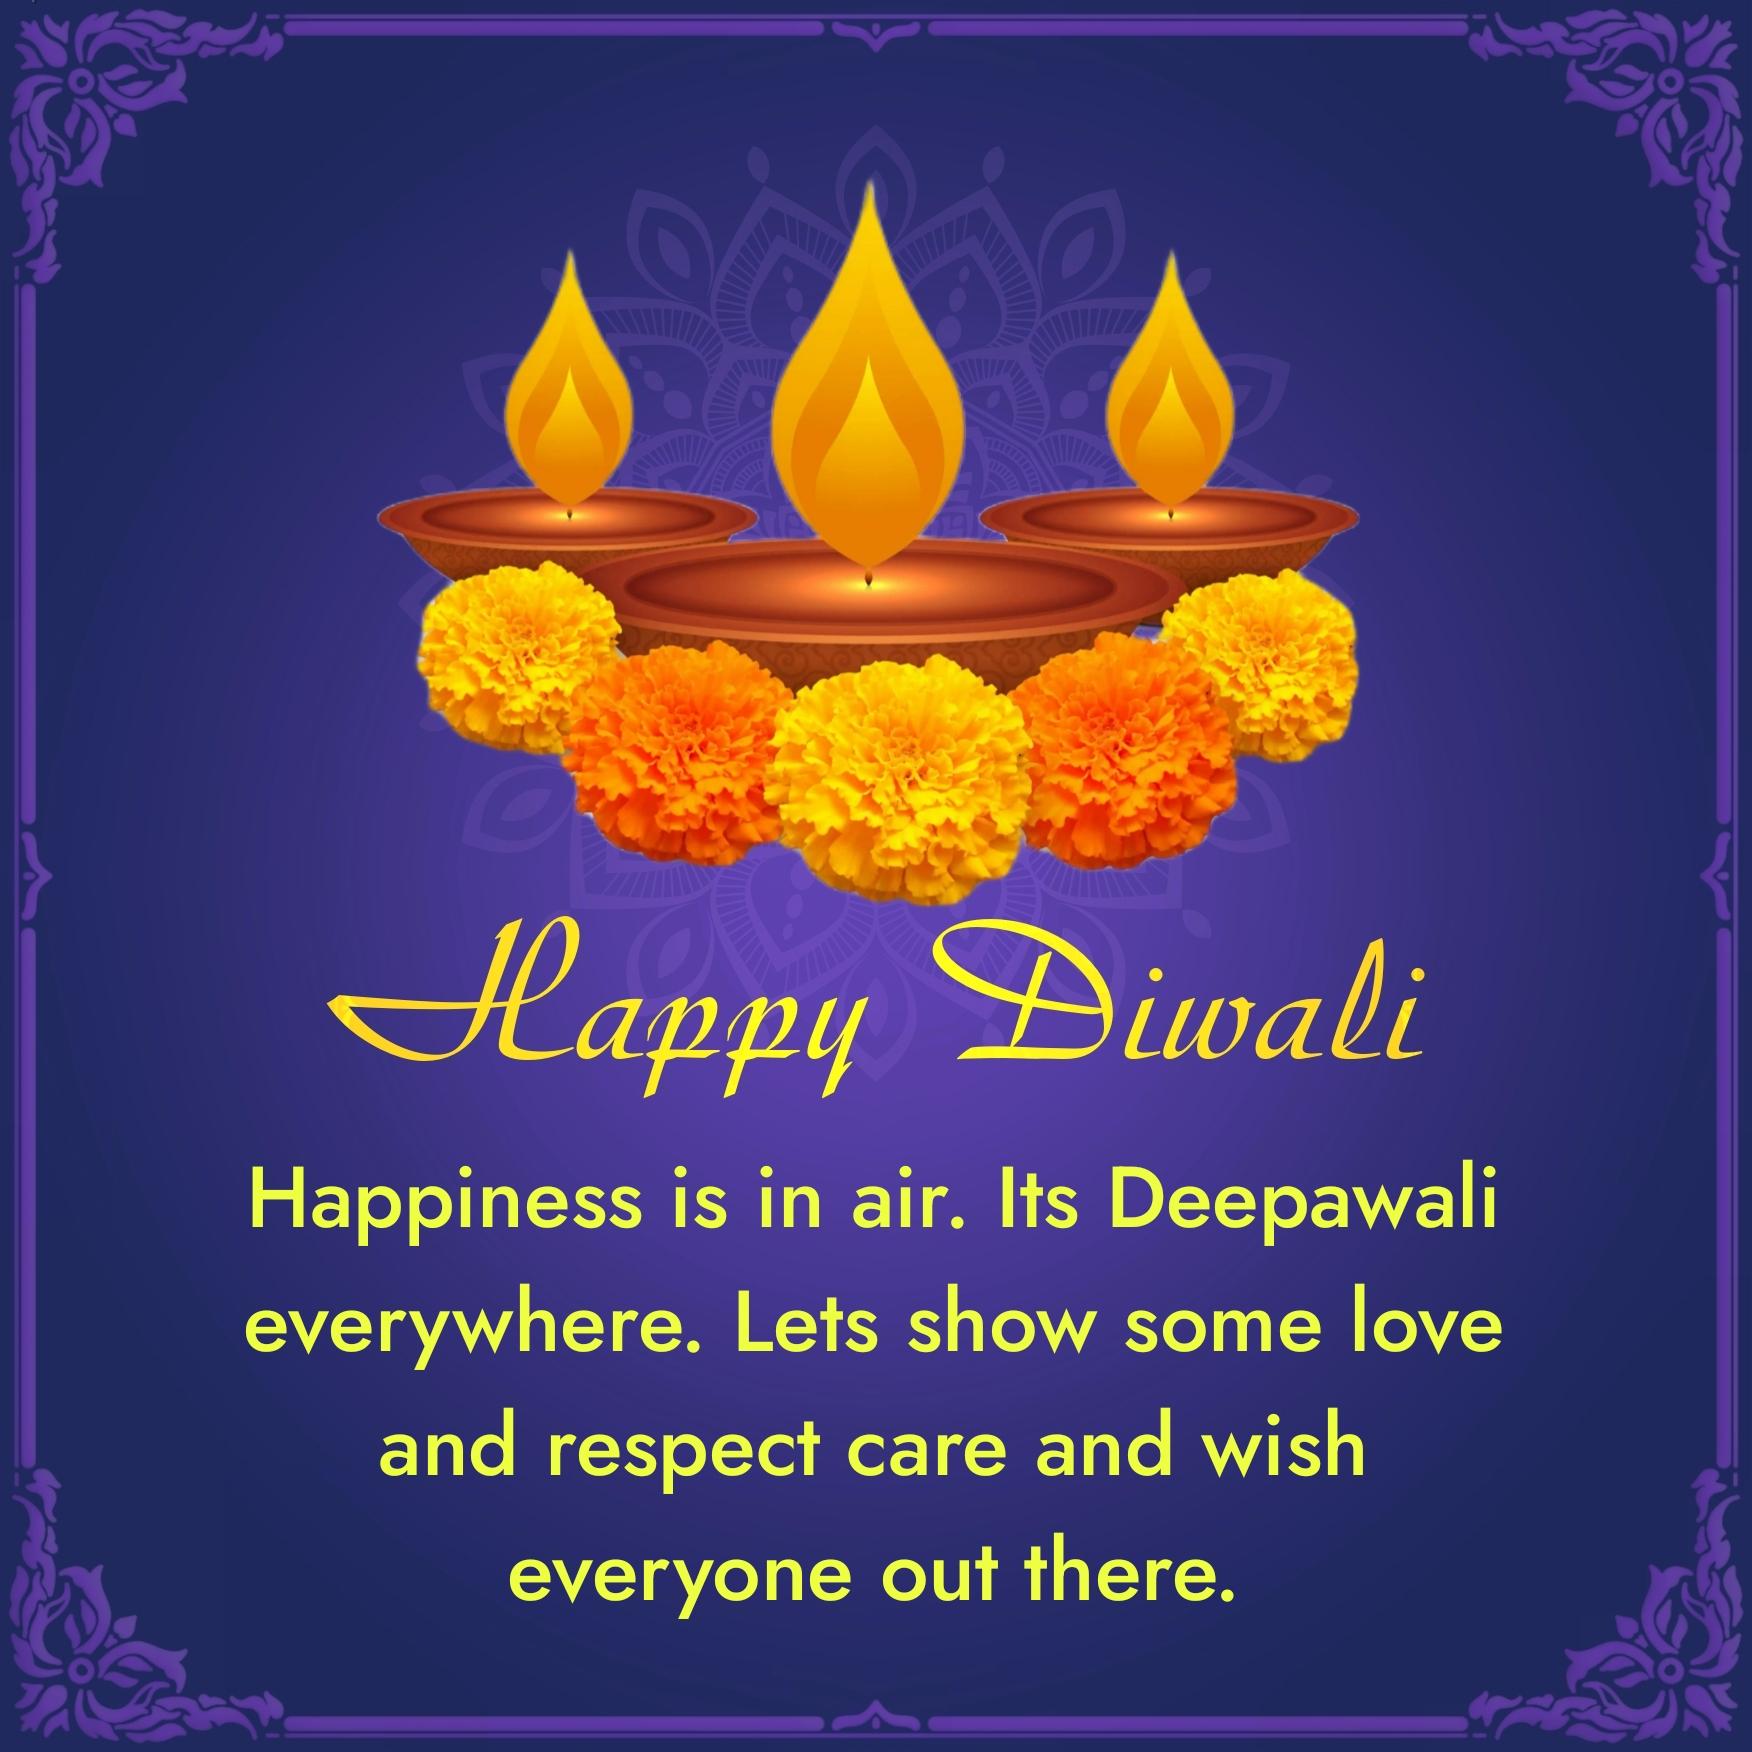 Happiness is in air Its Deepawali everywhere